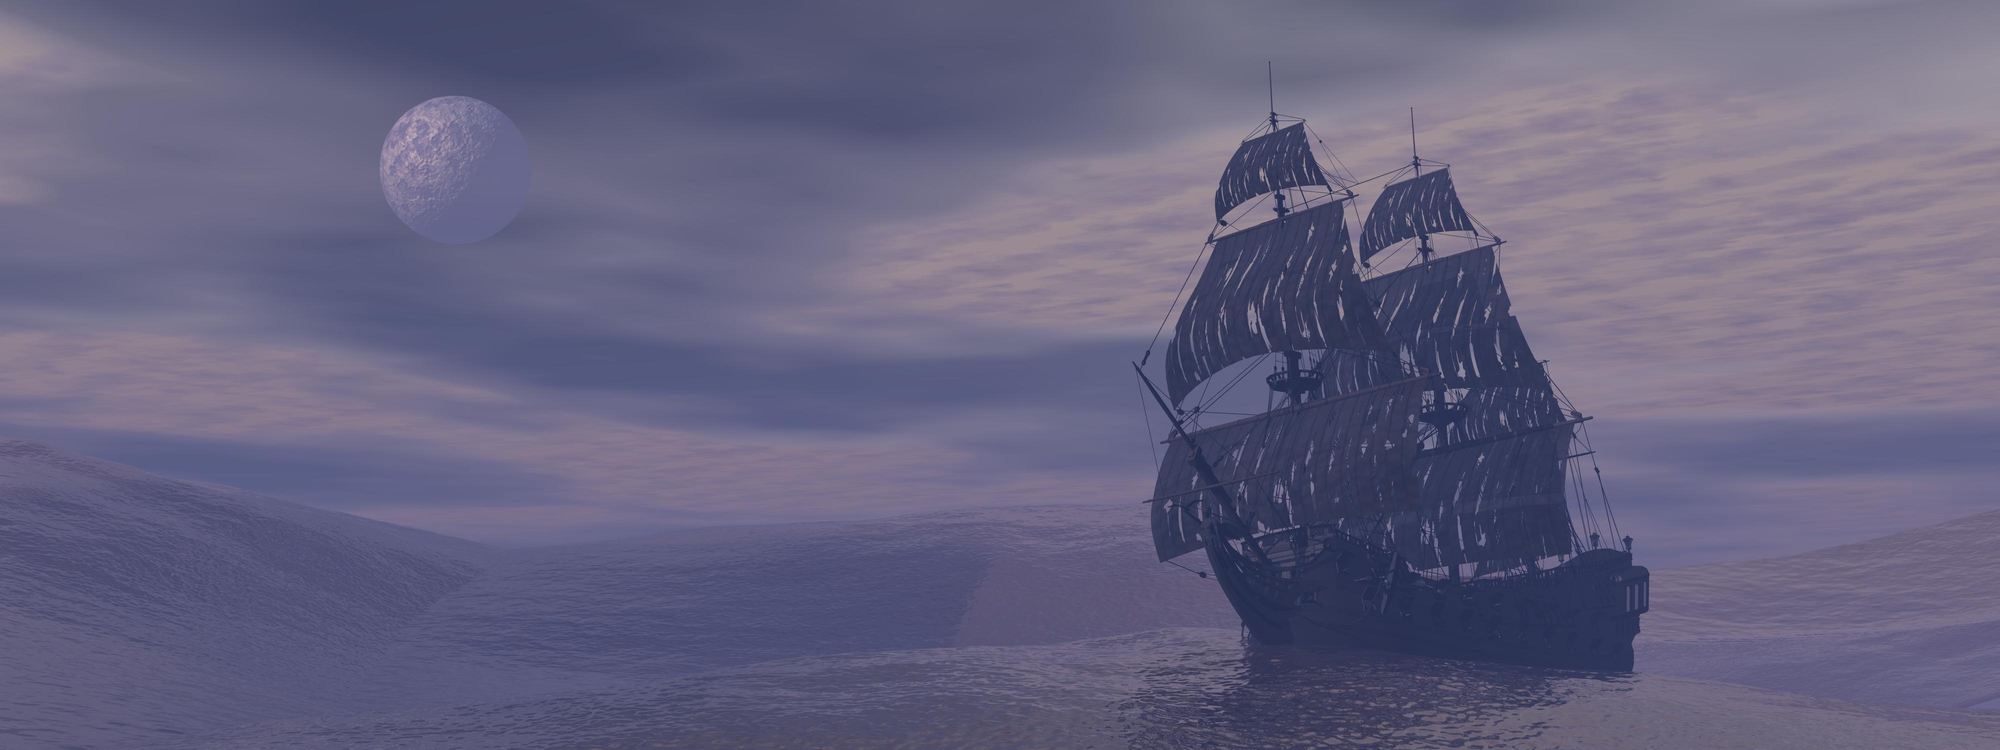 The Ghost Ship of Souda Bay